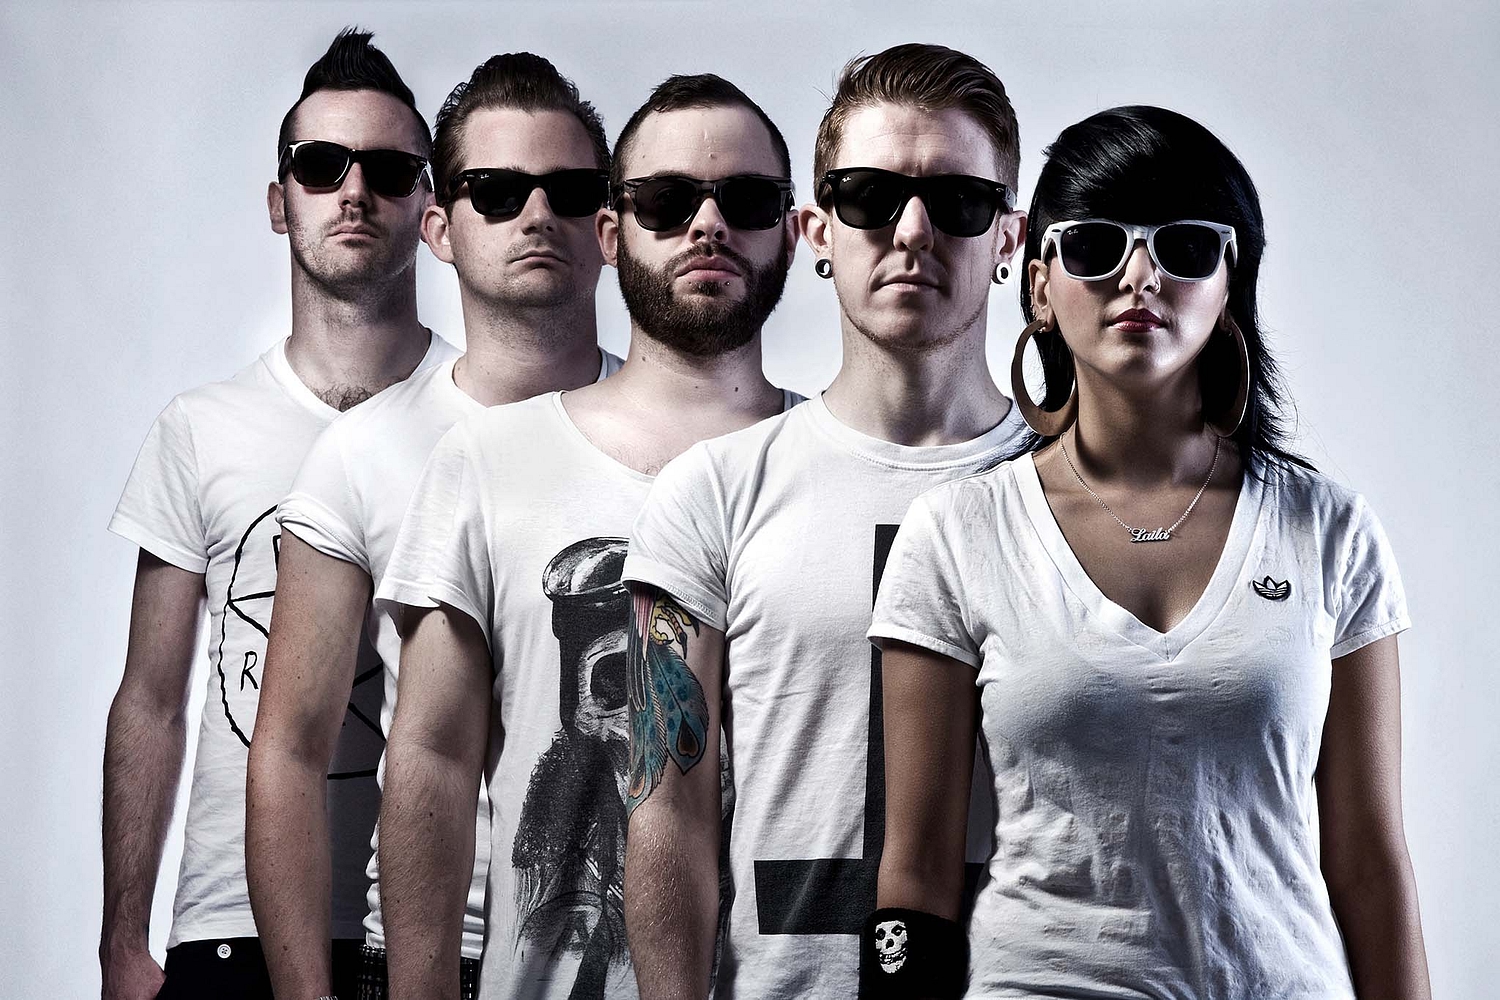 Win Tickets To Sonic Boom Six’s Manchester #STANDFORSOMETHING Show